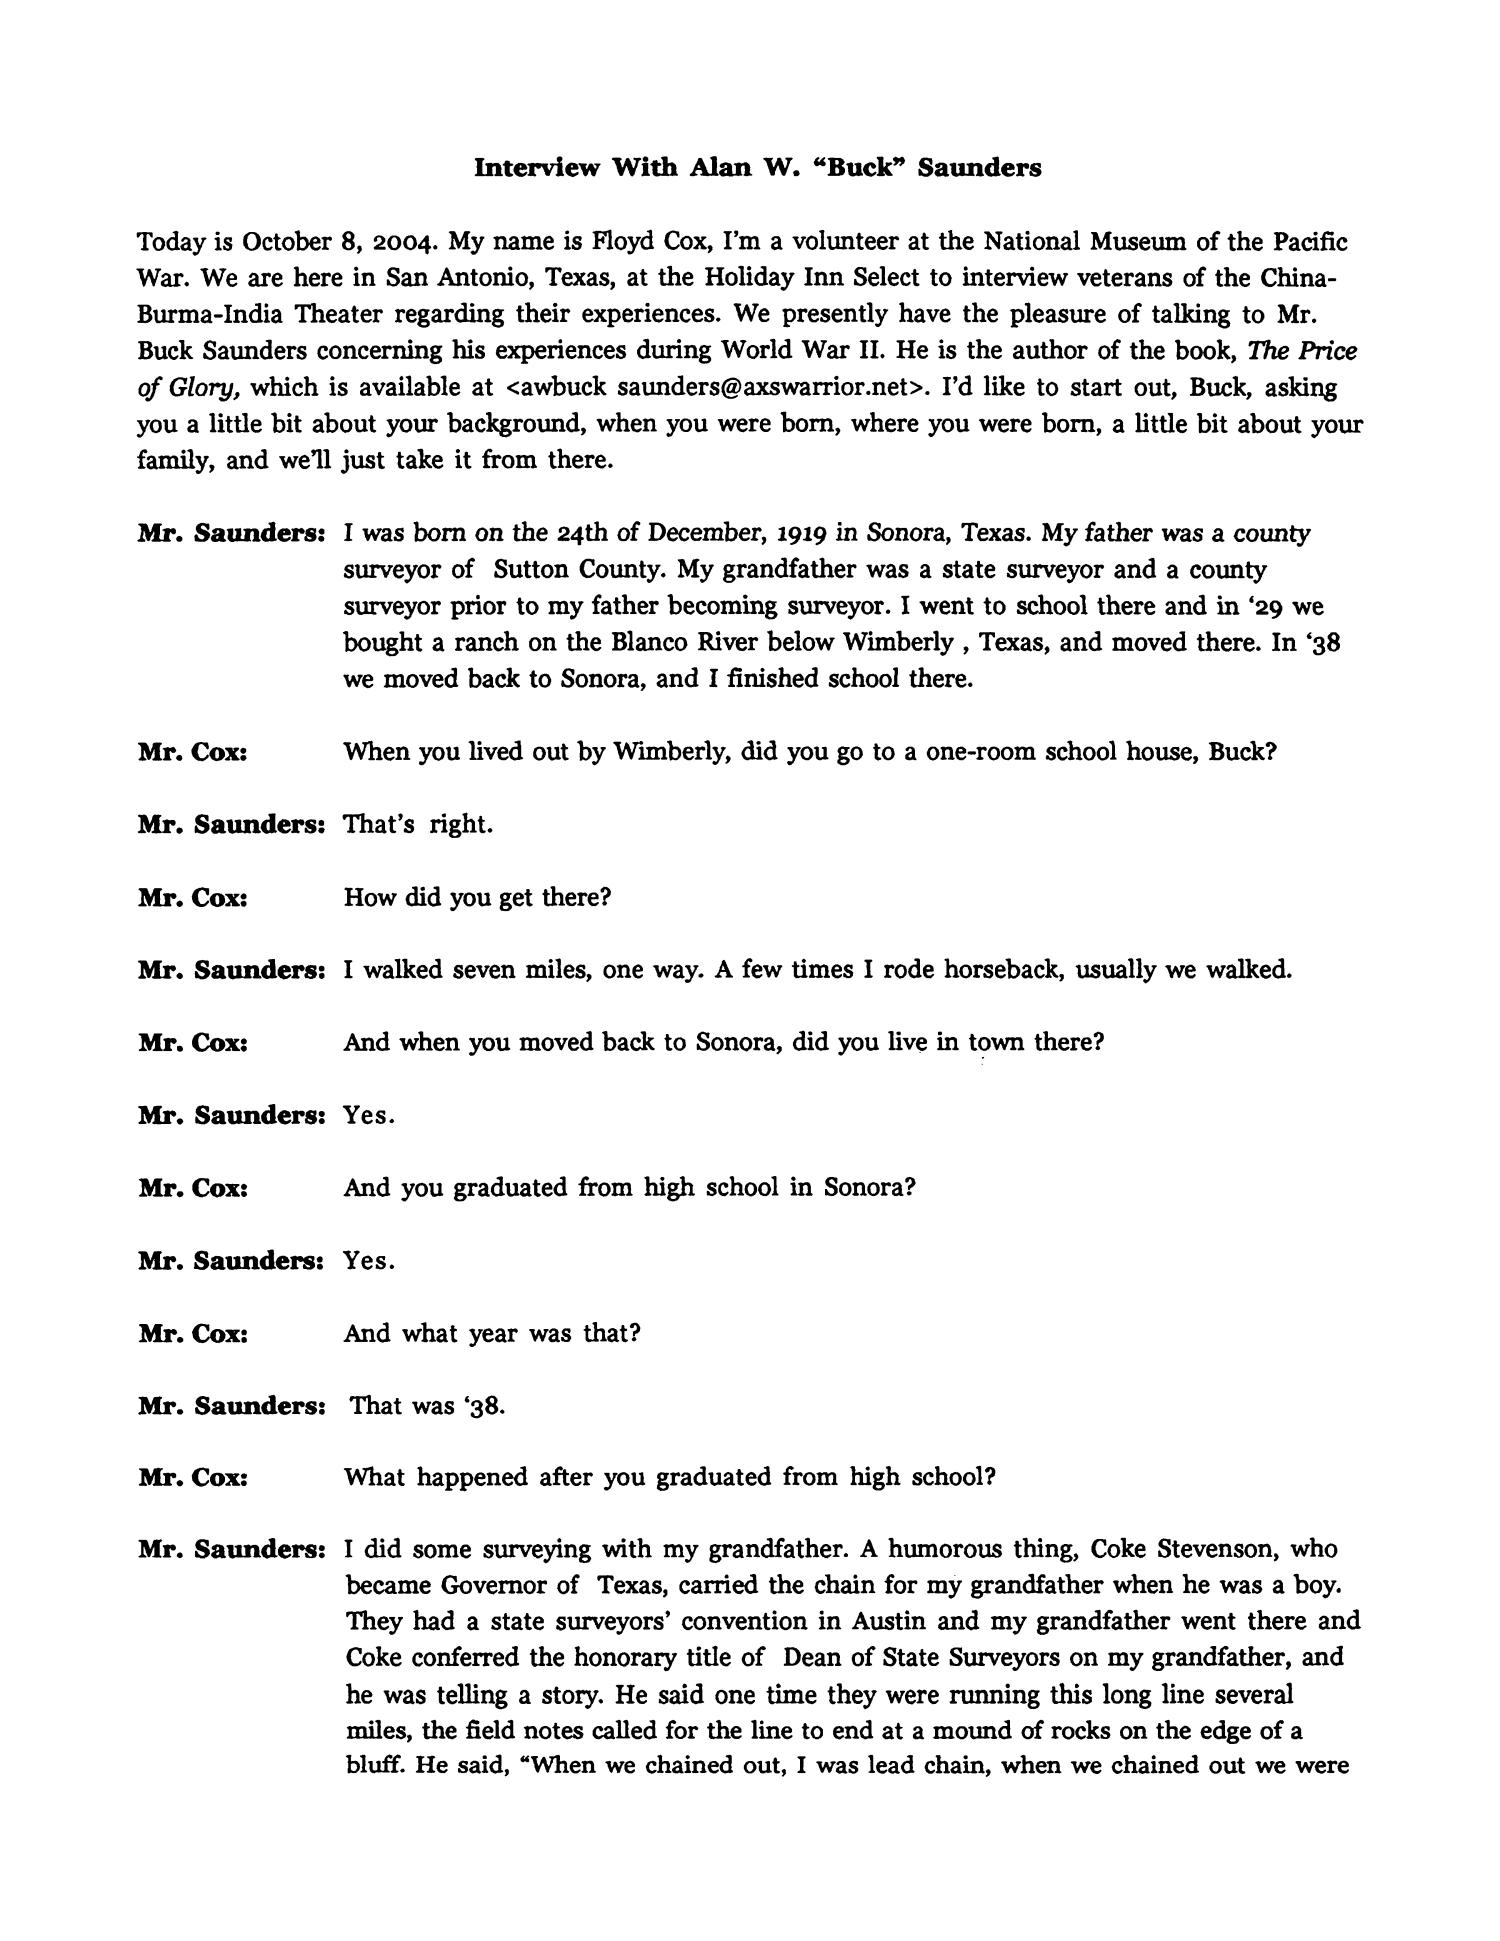 Oral History Interview with Alan W. Saunders, October 8, 2004
                                                
                                                    1
                                                